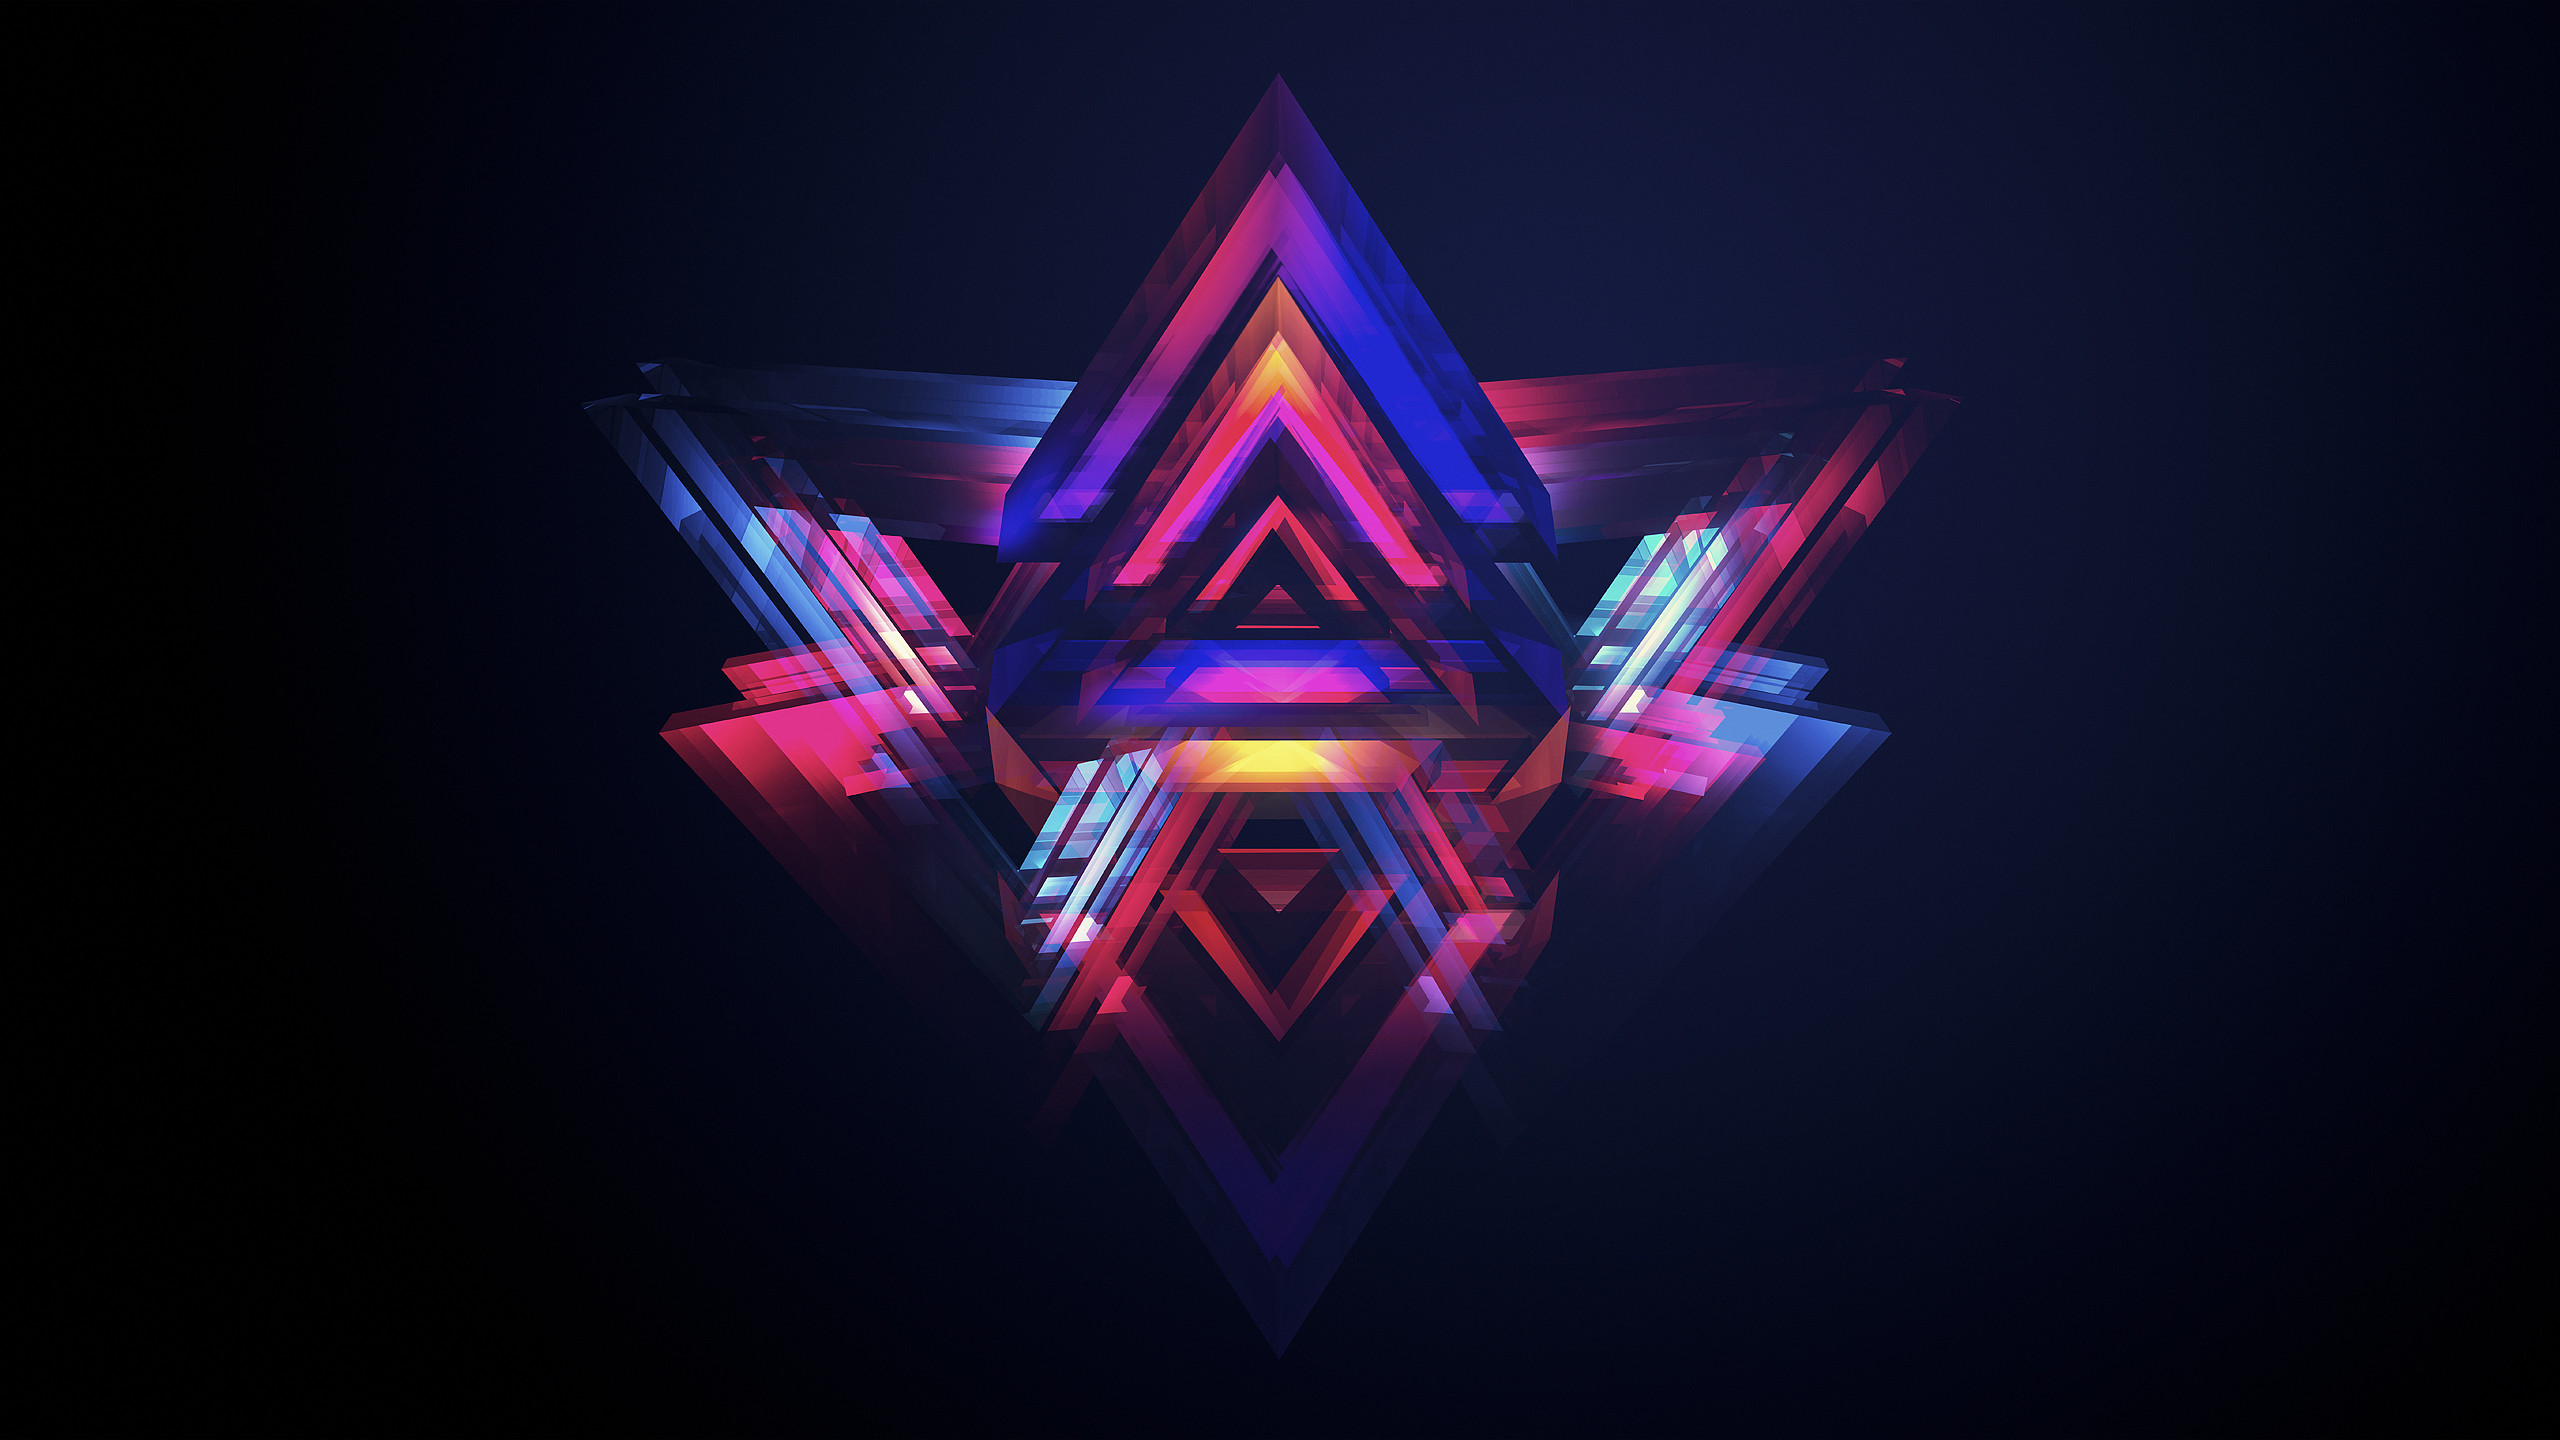 Cool 3d Abstract Wallpaper Image